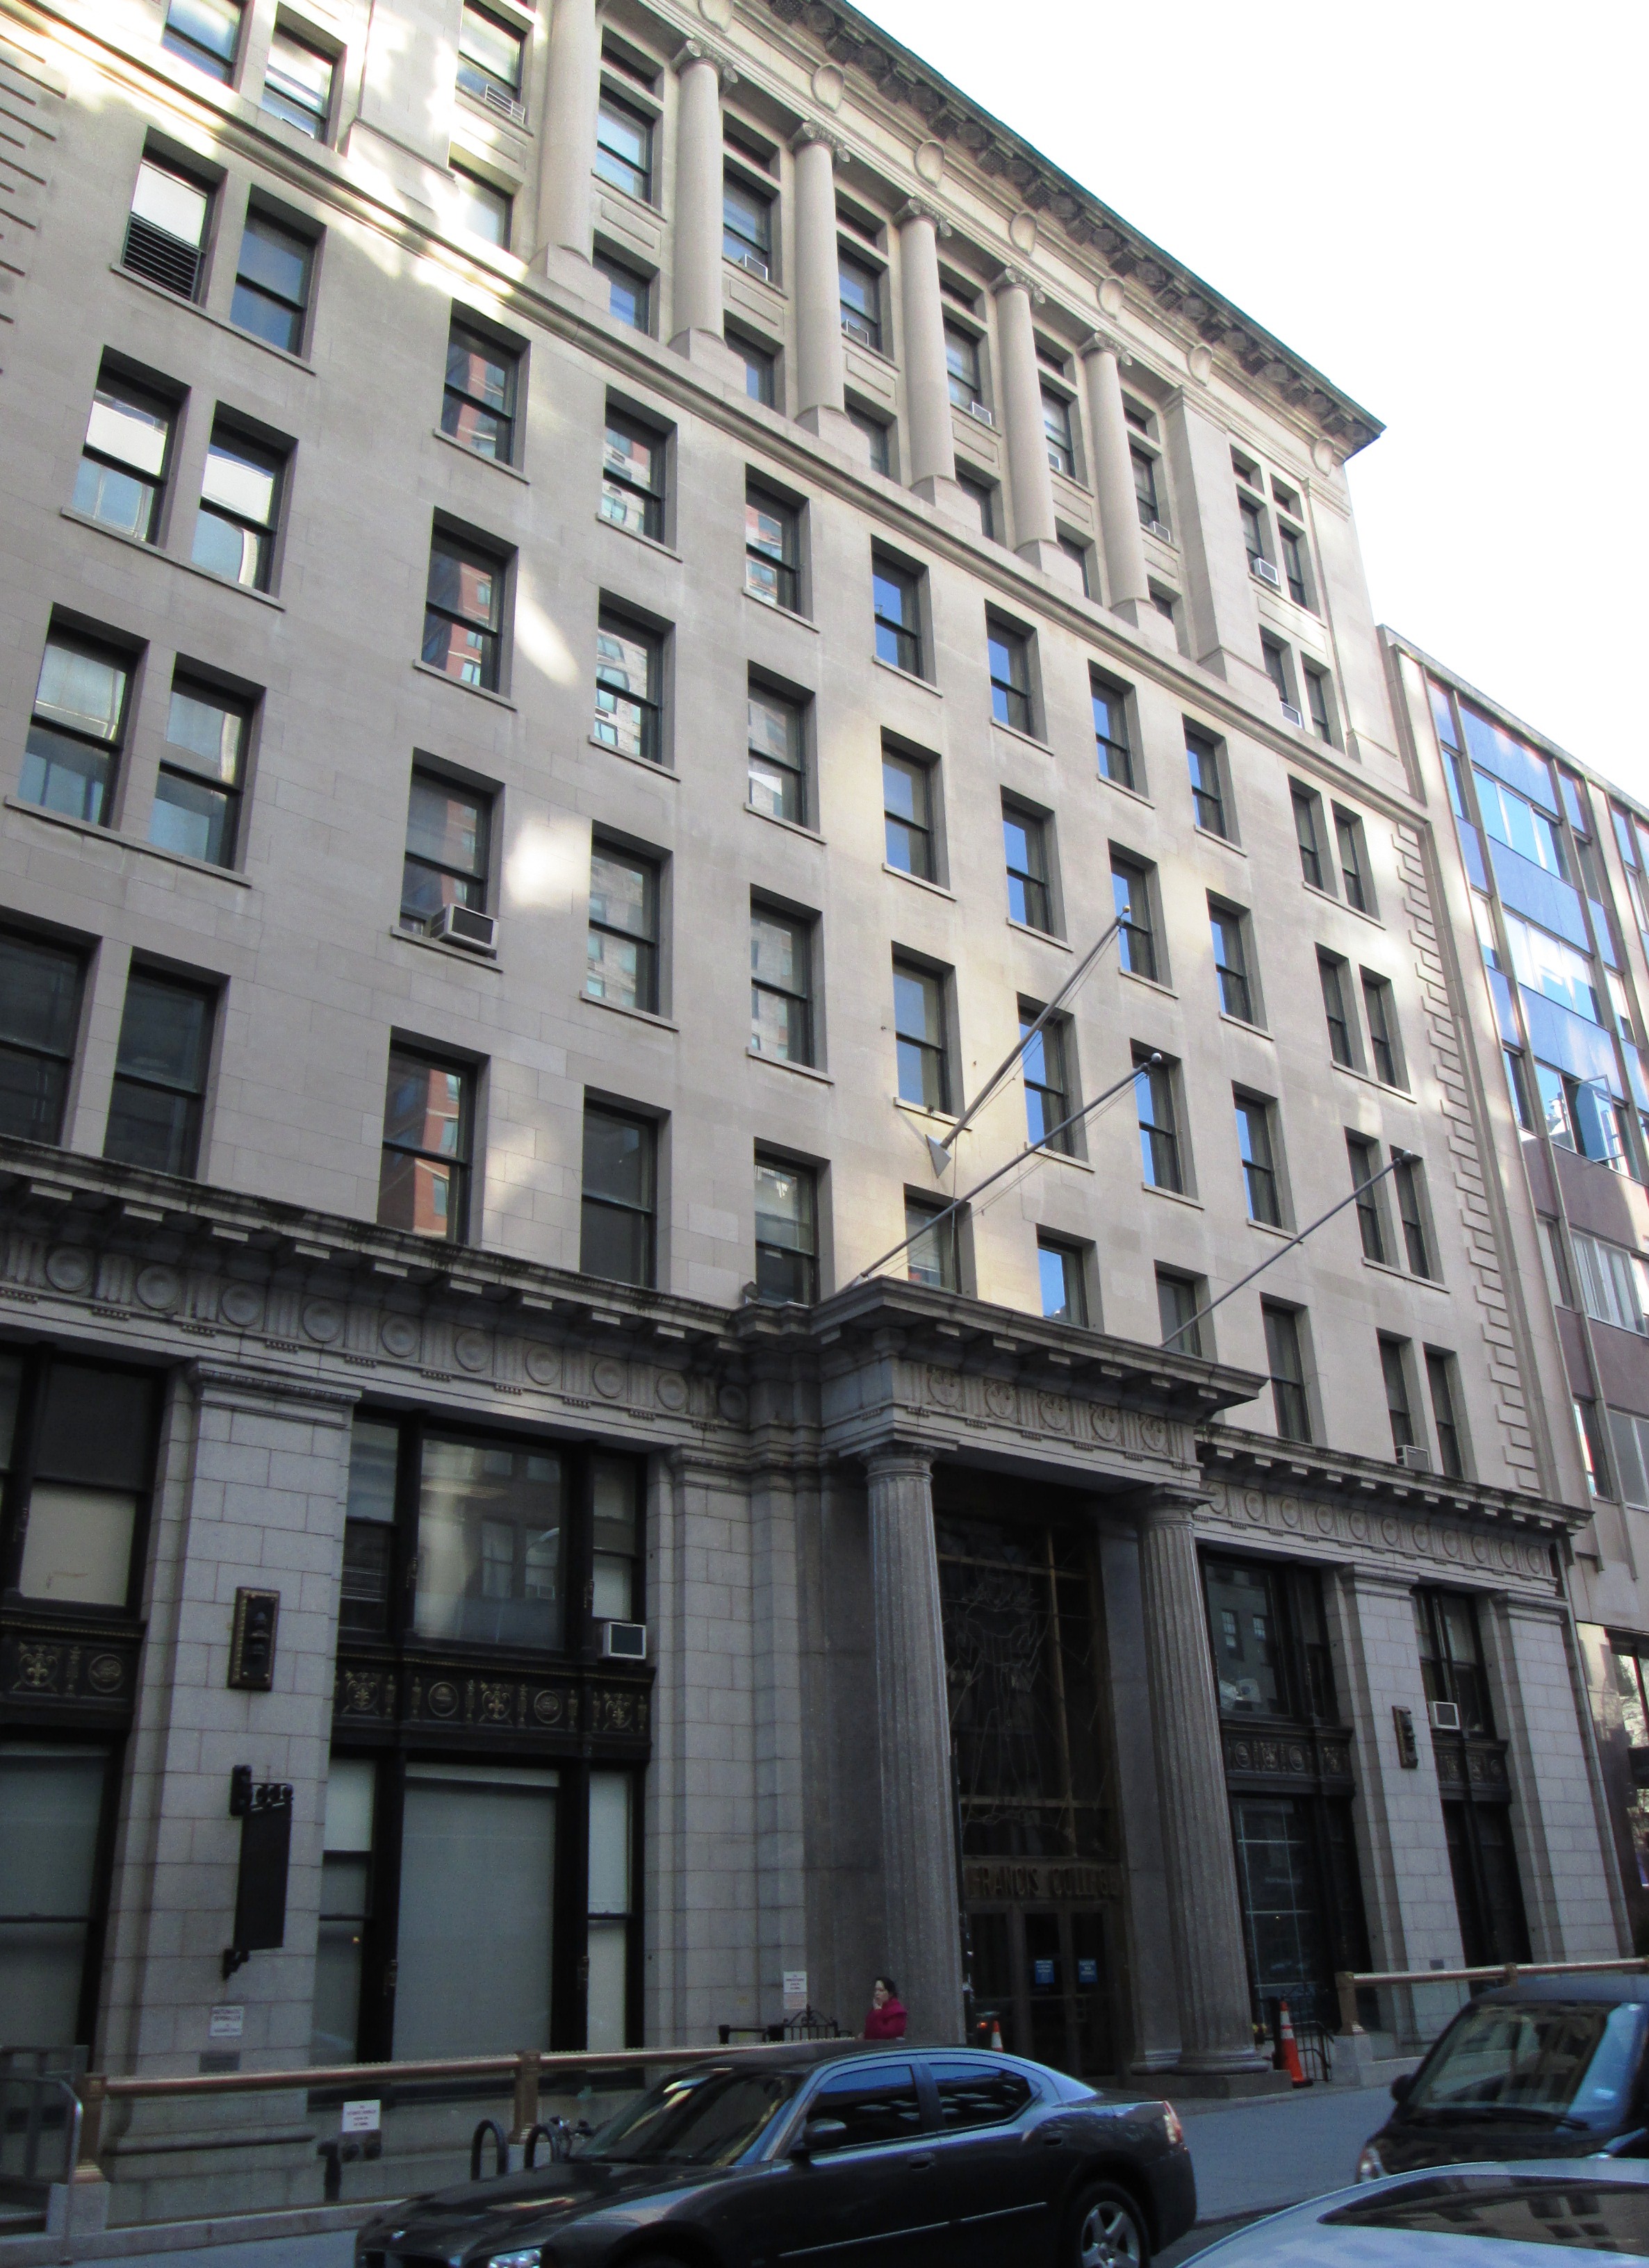 brooklyn-union-gas-company-headquarters-from-east-hdc